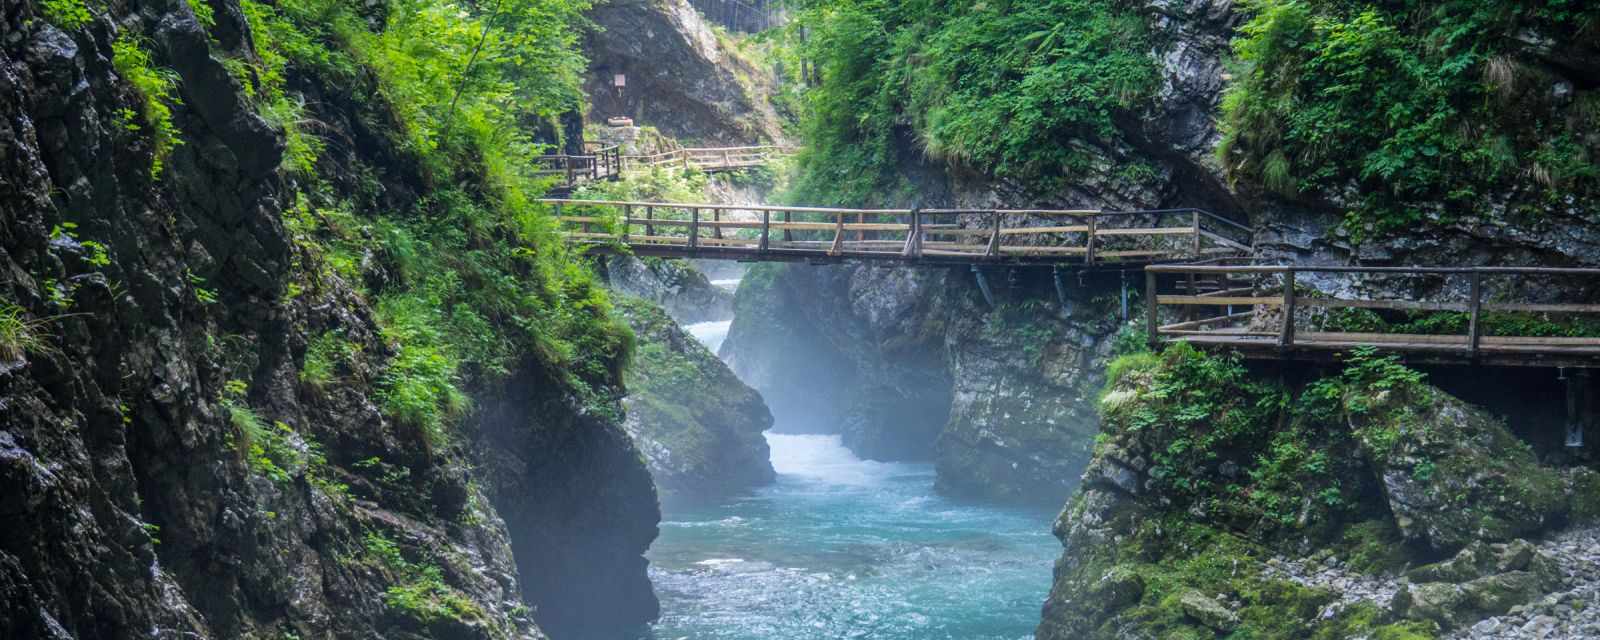 Vintgar Gorge - Parking, Tickets, and Tips for the Hike Close to Bled